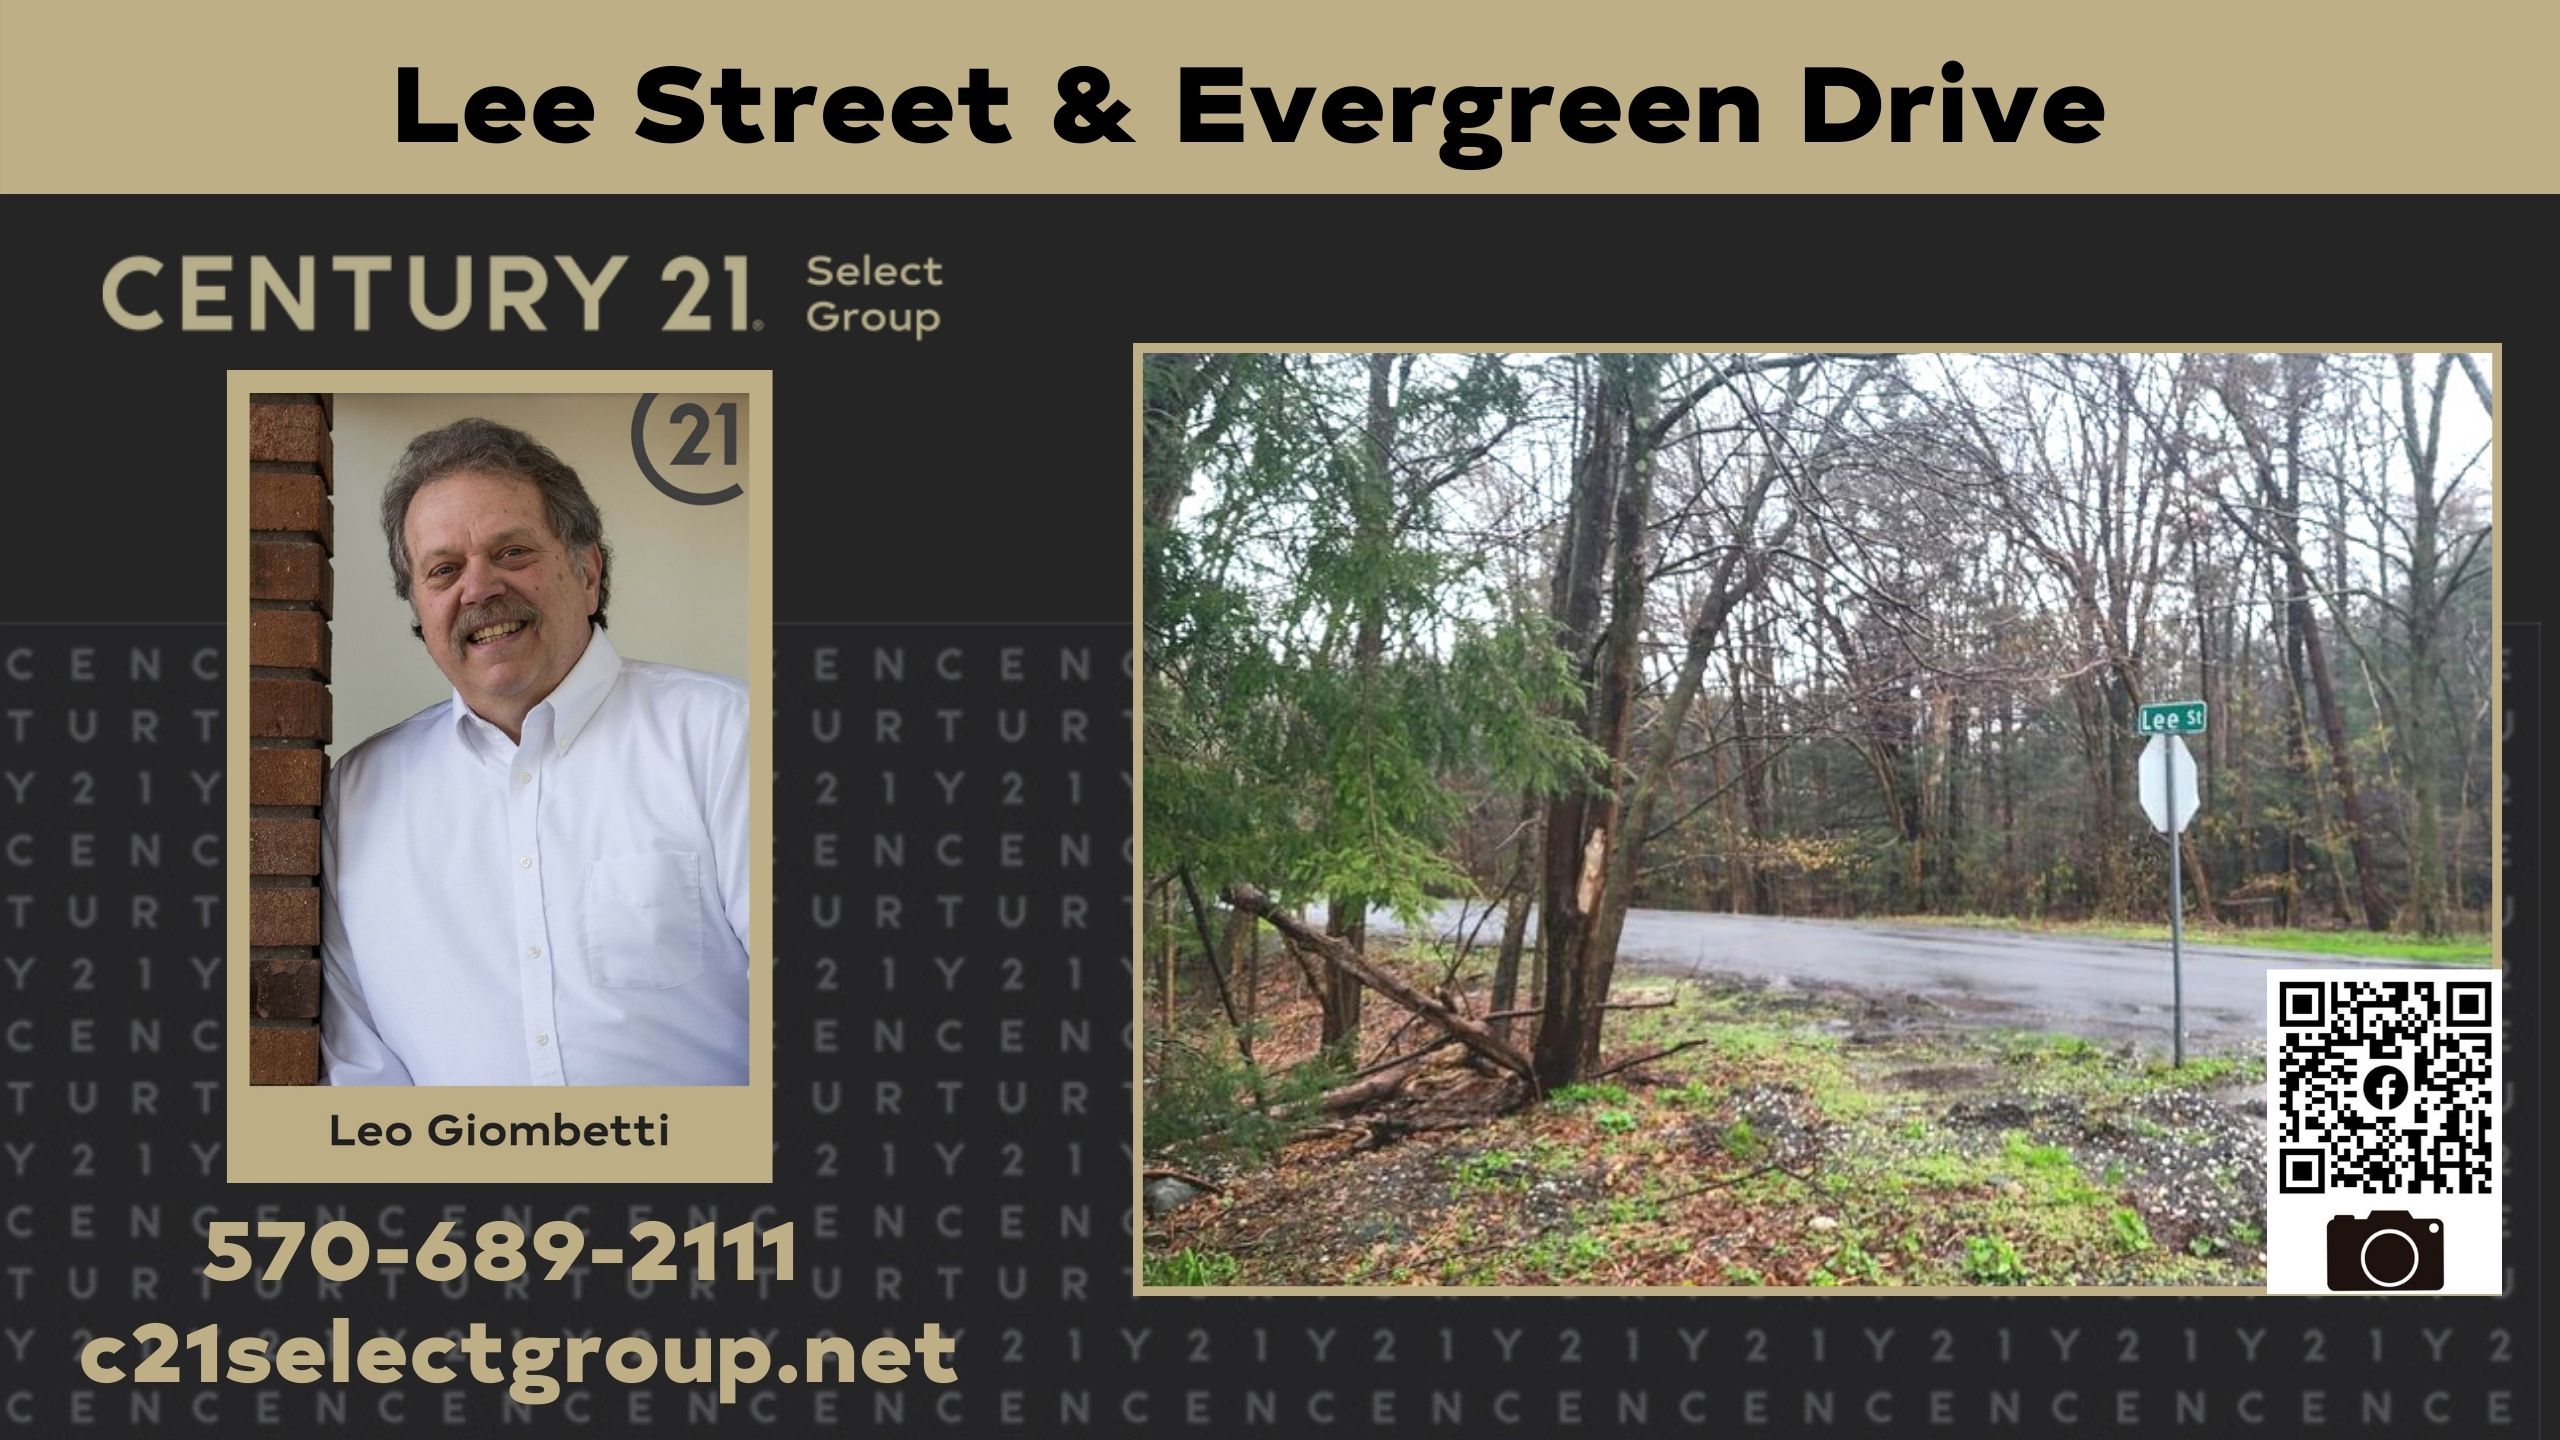 NEW REDUCED PRICE! Lee St & Evergreen Dr: Half Acre Wooded Corner Lot